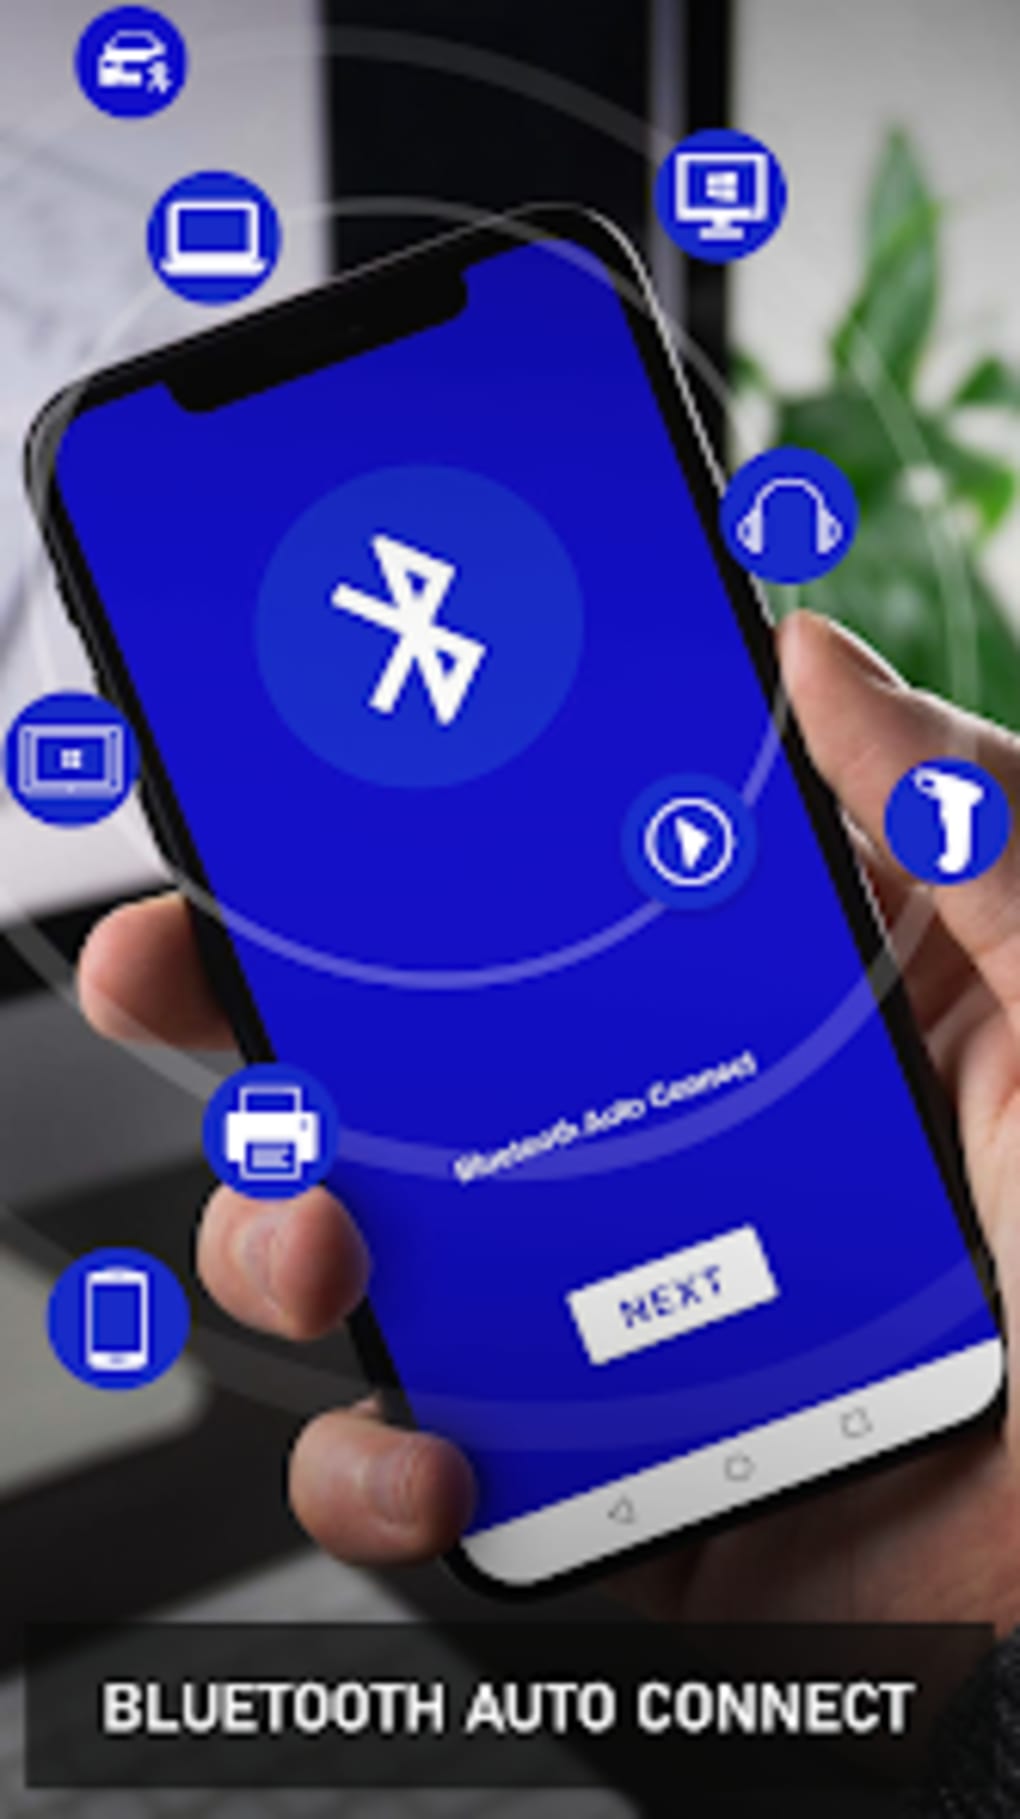  Auto Connect: Pair لنظام Android - تنزيل